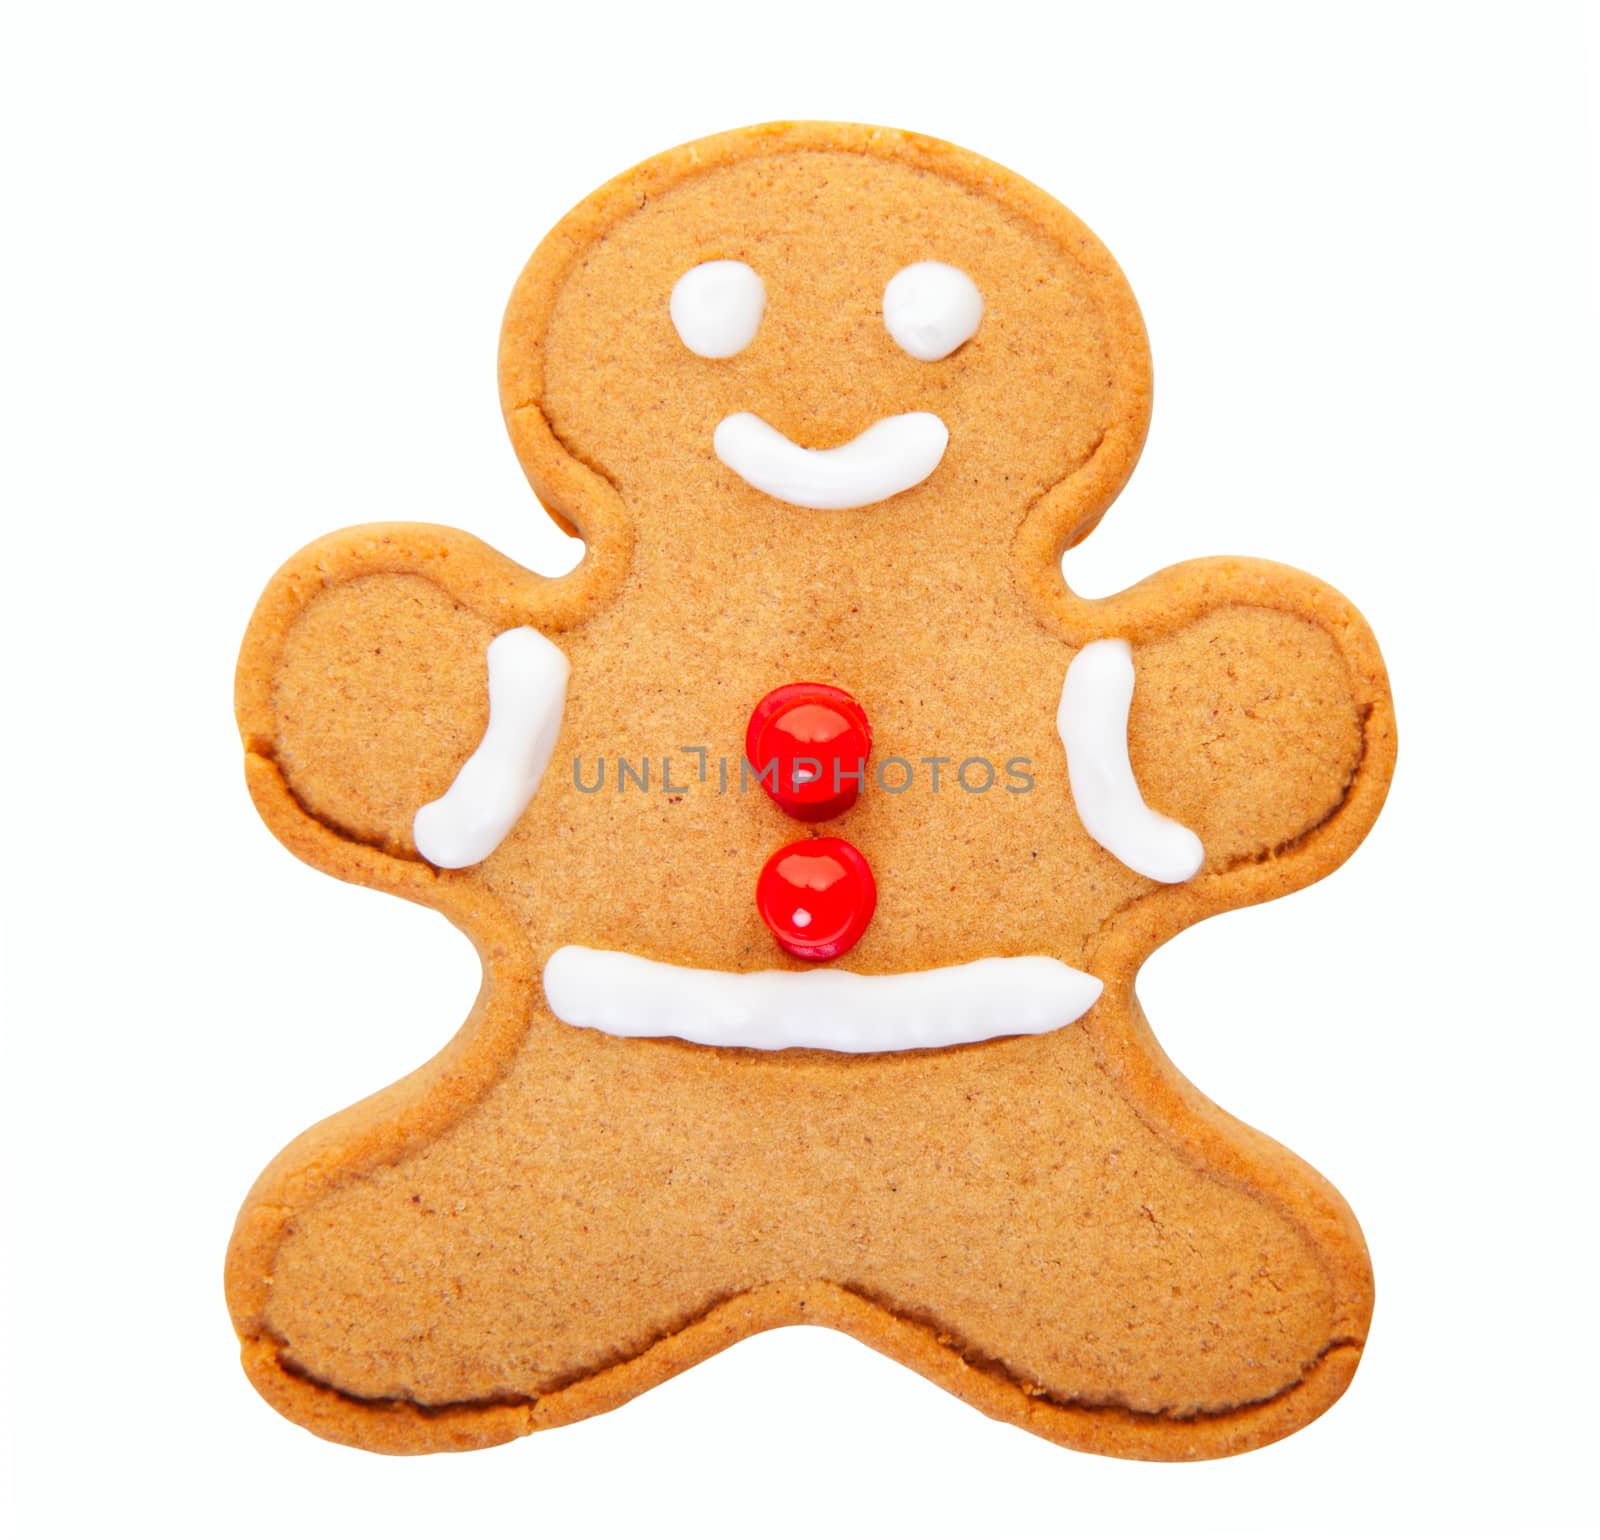 Gingerbread Man with Clipping Path by songbird839